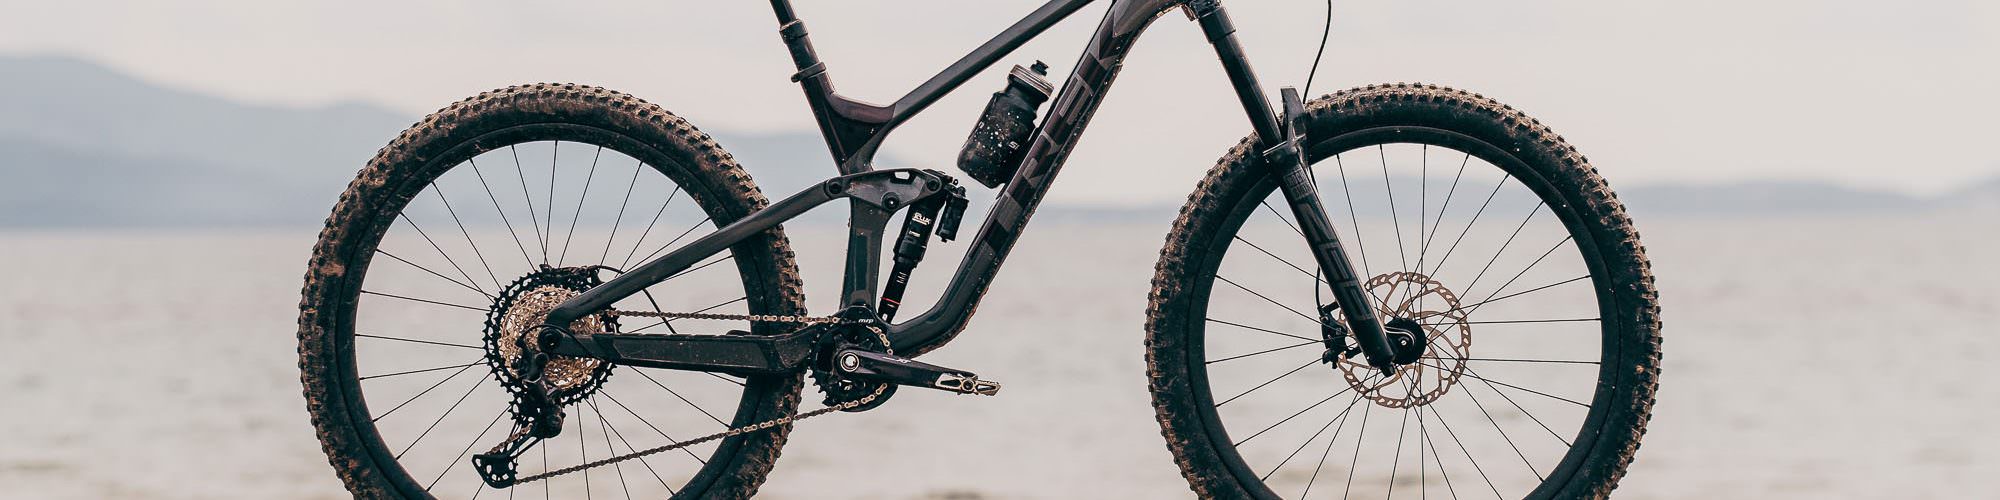 2021 Trek Slash 9.8 XT review – A great all-rounder and a well